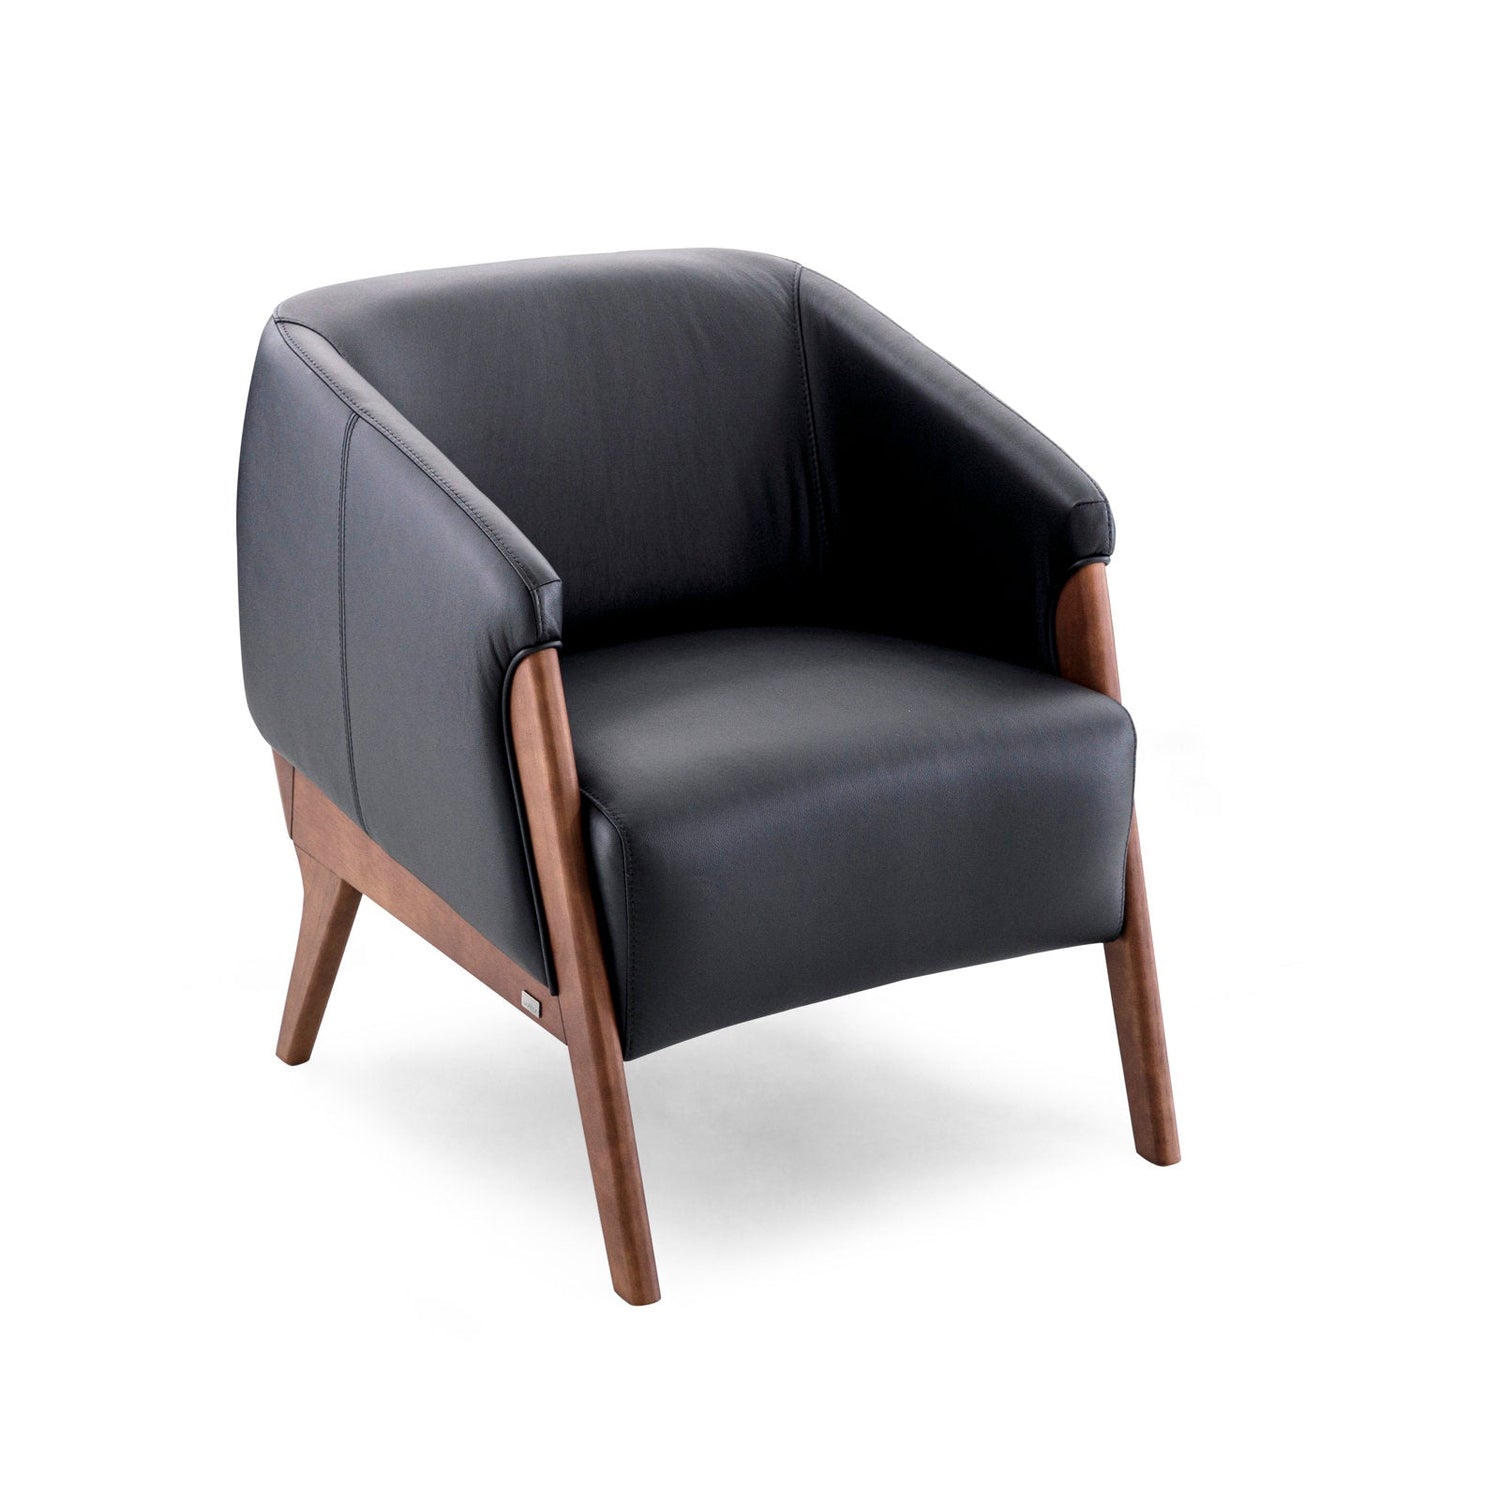 Uultis, Abra Solid Wood Genuine Leather Armchair